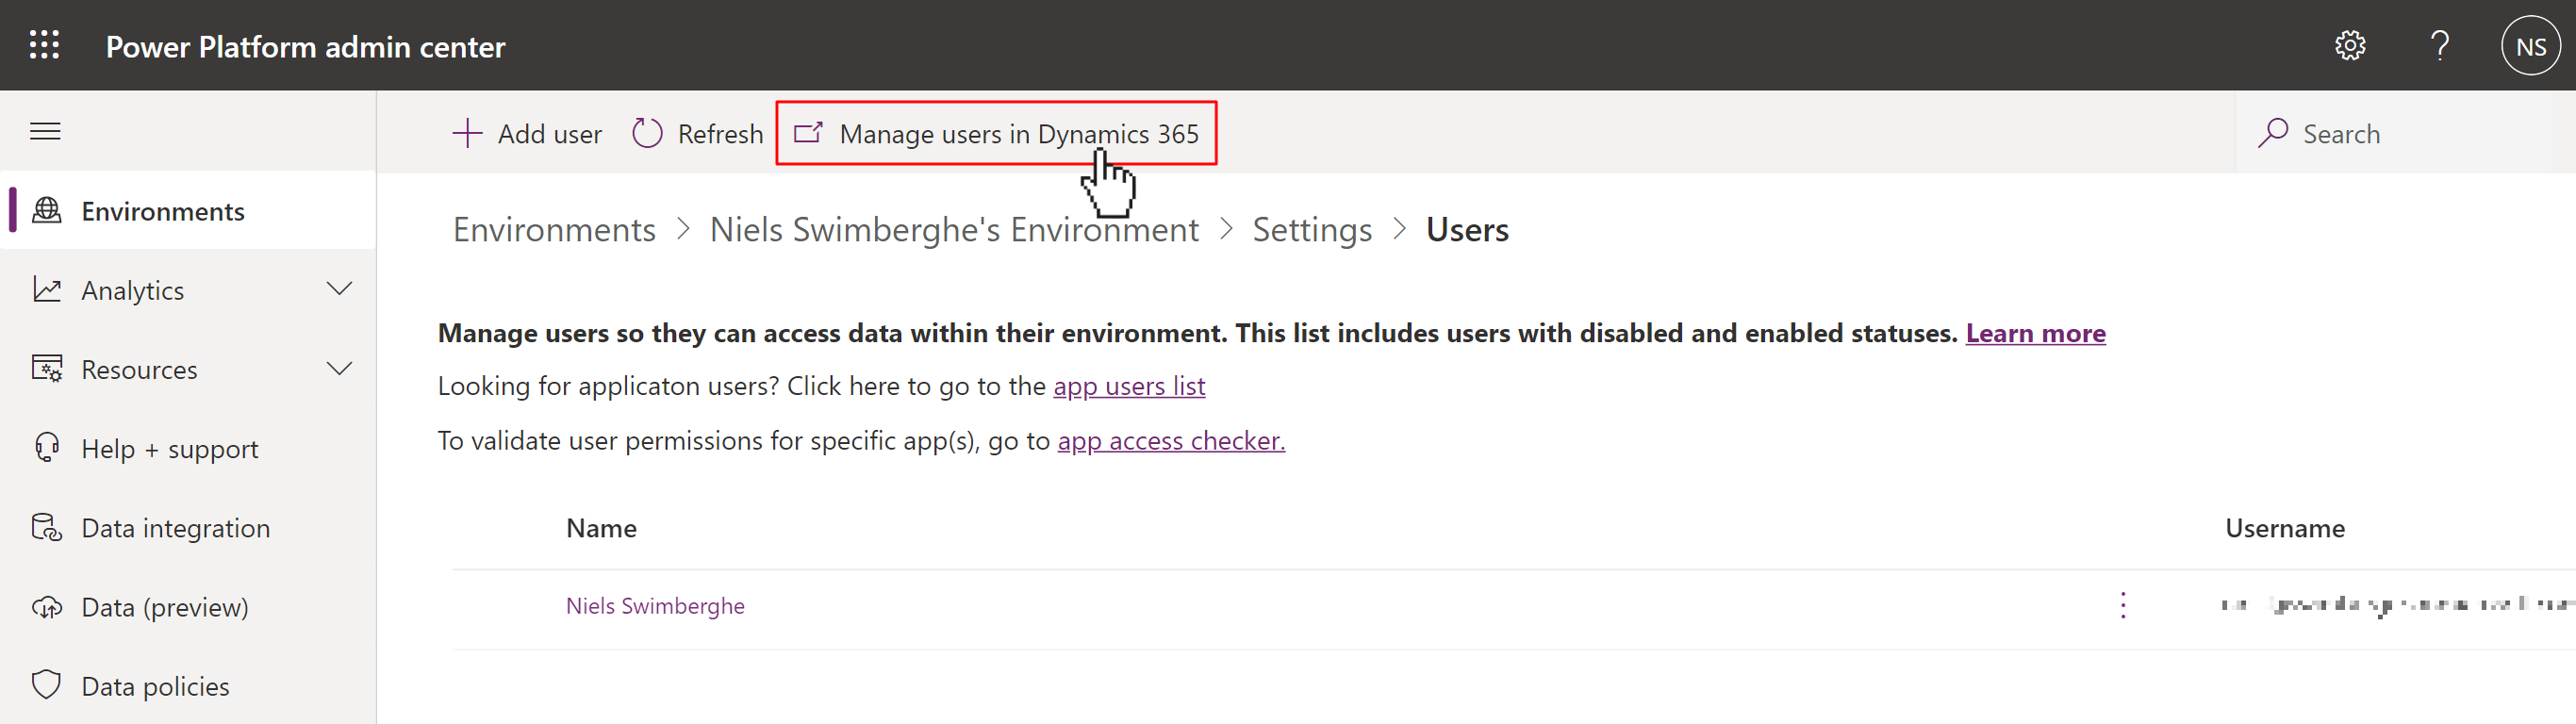 Power Platform Admin Center screen to manage users, but the cursor is clicking on &quot;Manager users in Dynamics 365&quot; button.